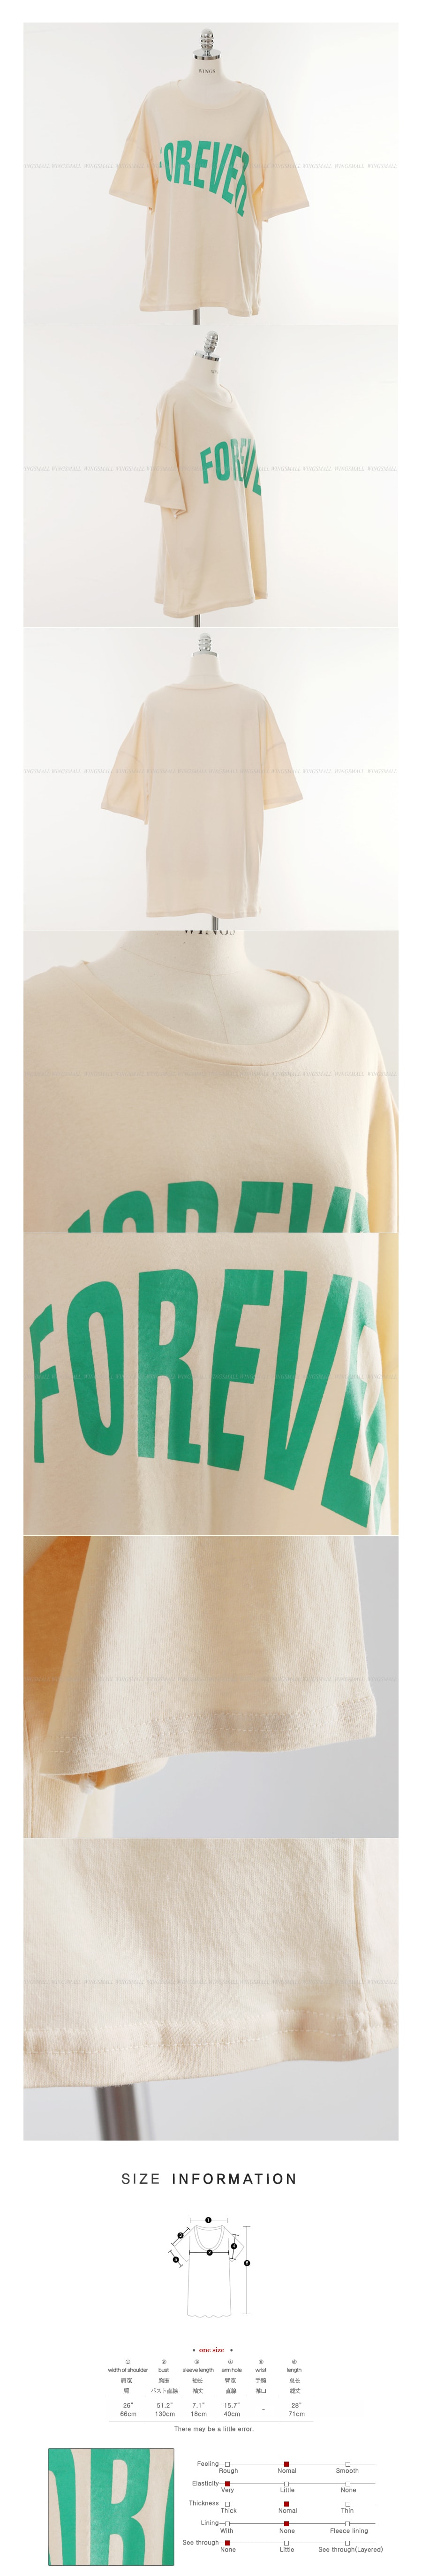 [KOREA] FOREVER Oversized T-Shirt+Sport Skort 2 Pieces #Mint One Size(S-M) [Free Shipping]